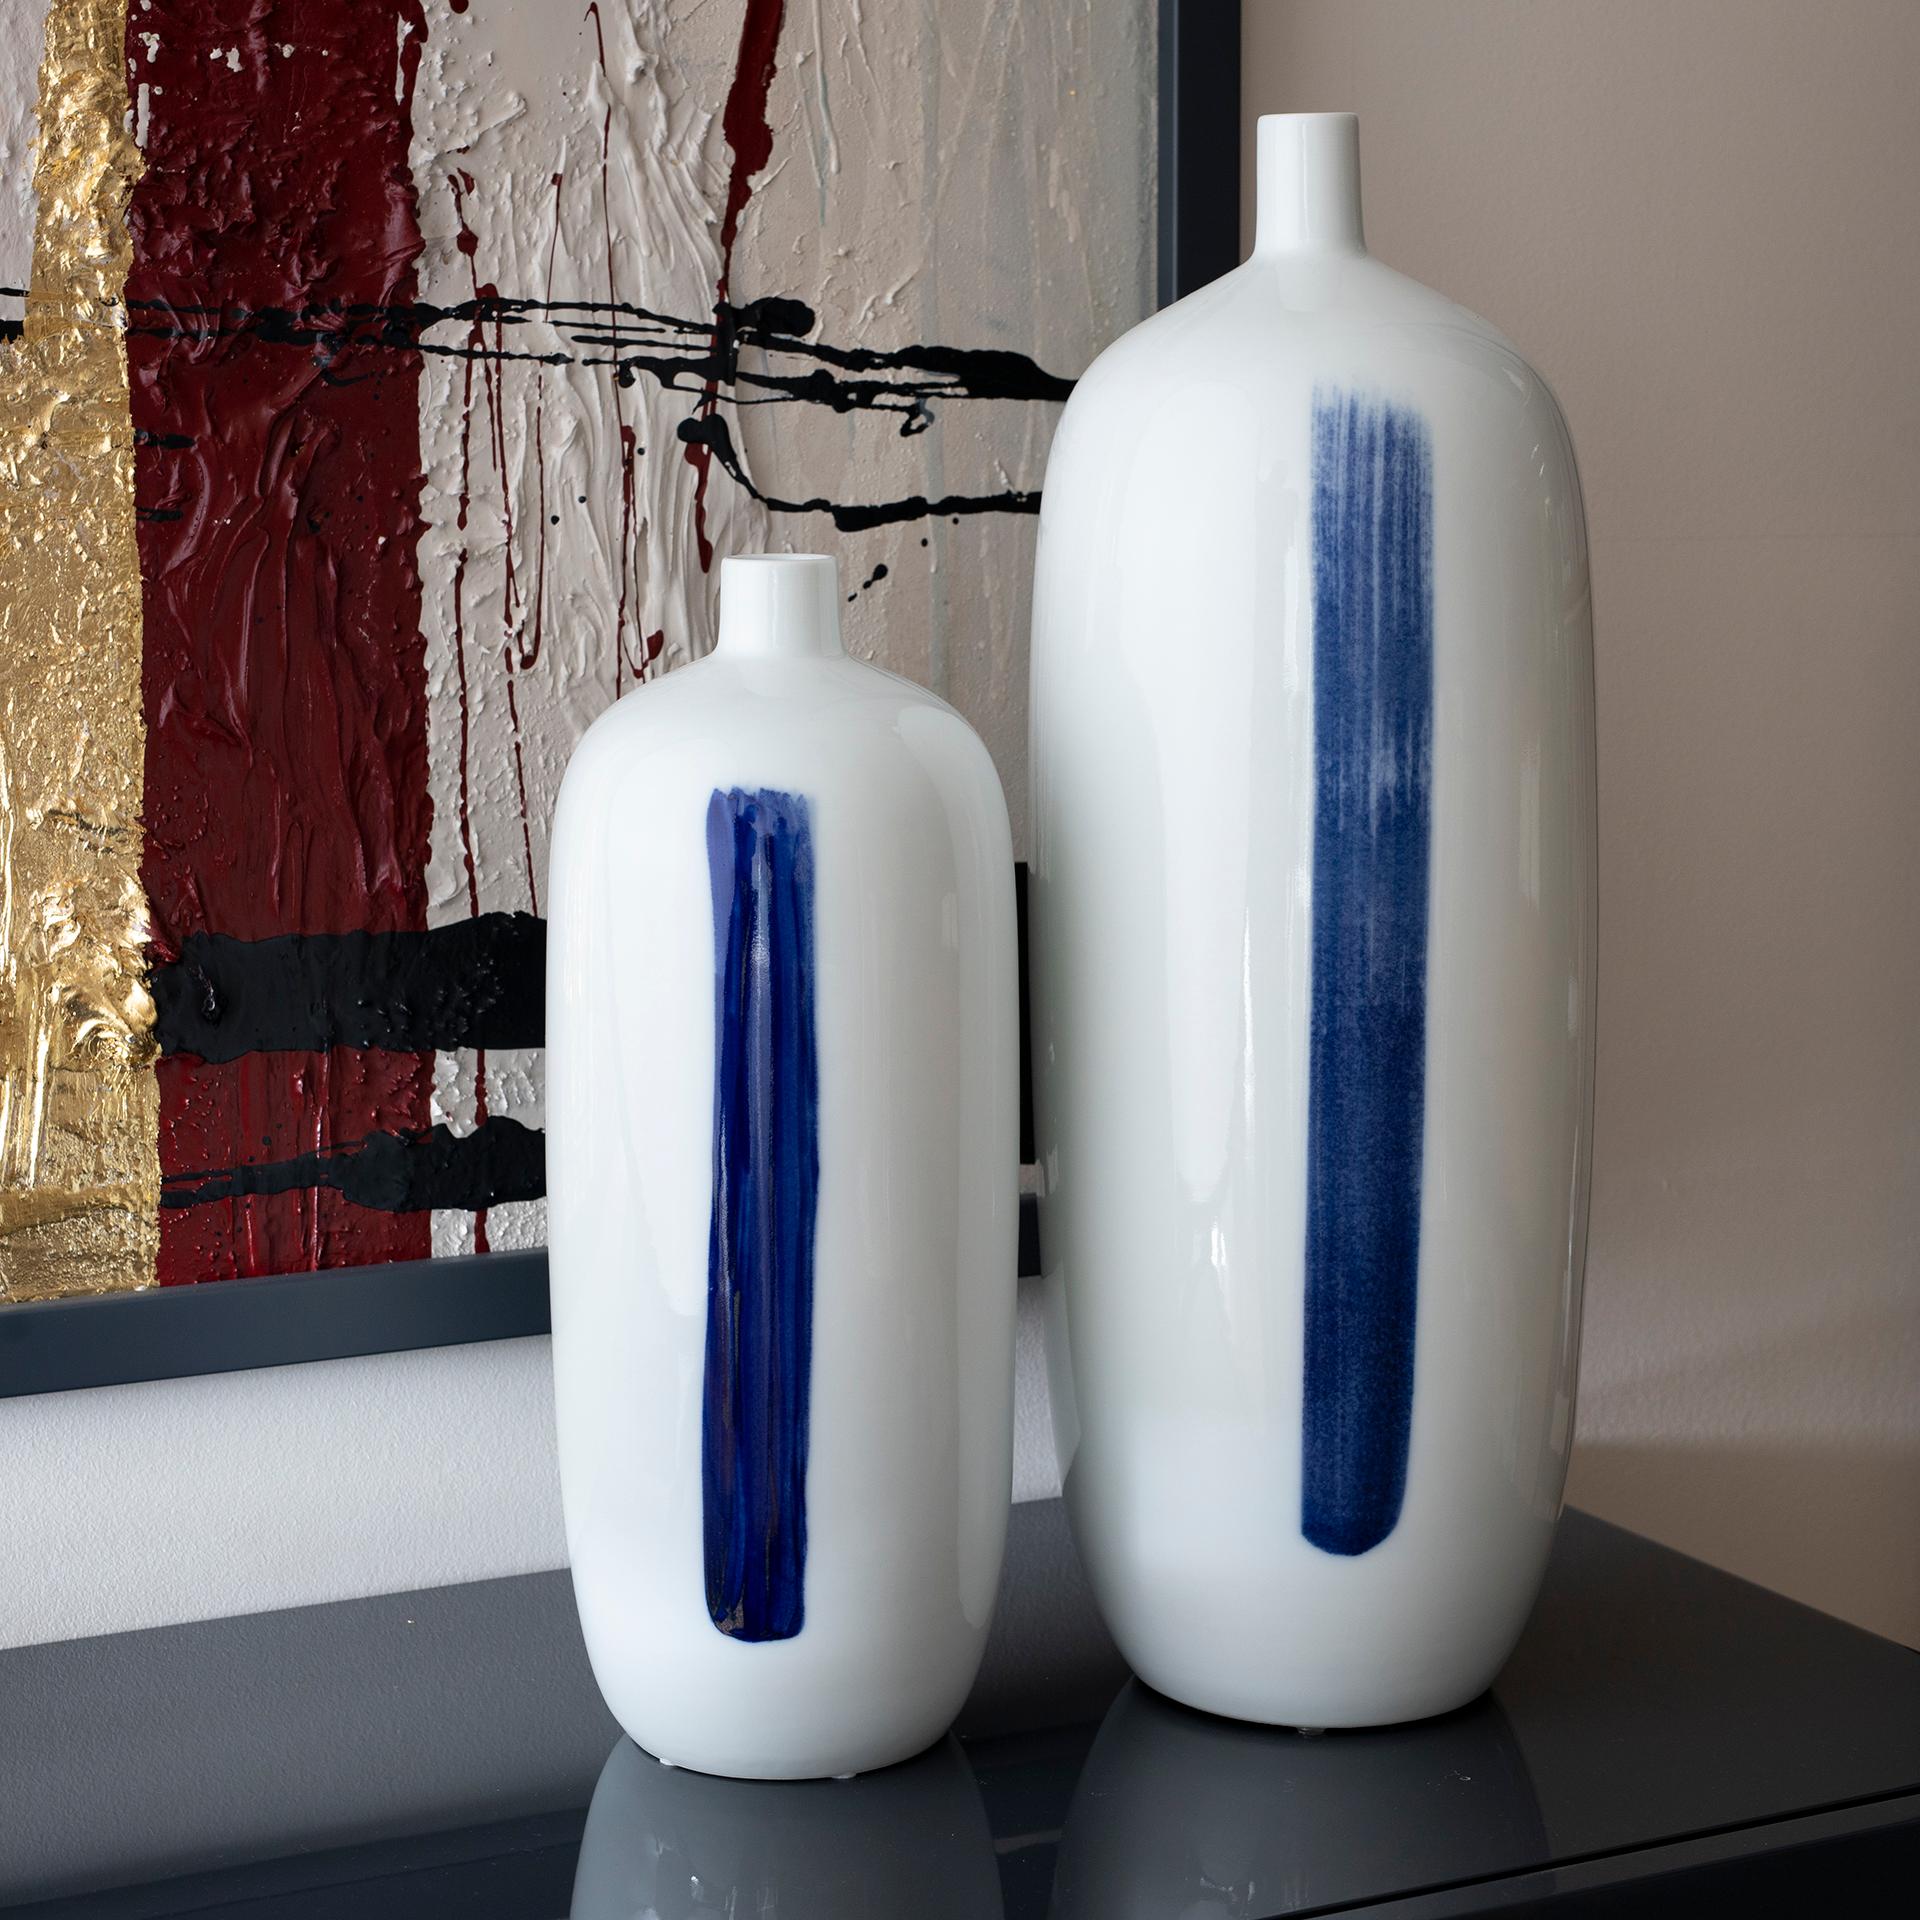 Set/2 Zong Porcelain Vases, Lusitanus Home Collection by Legend of Asia.

Real chinese porcelain waterproof vases in white and dark blue, produced by hand with traditional methods. The longtime relationship between Portugal and Macau is celebrated